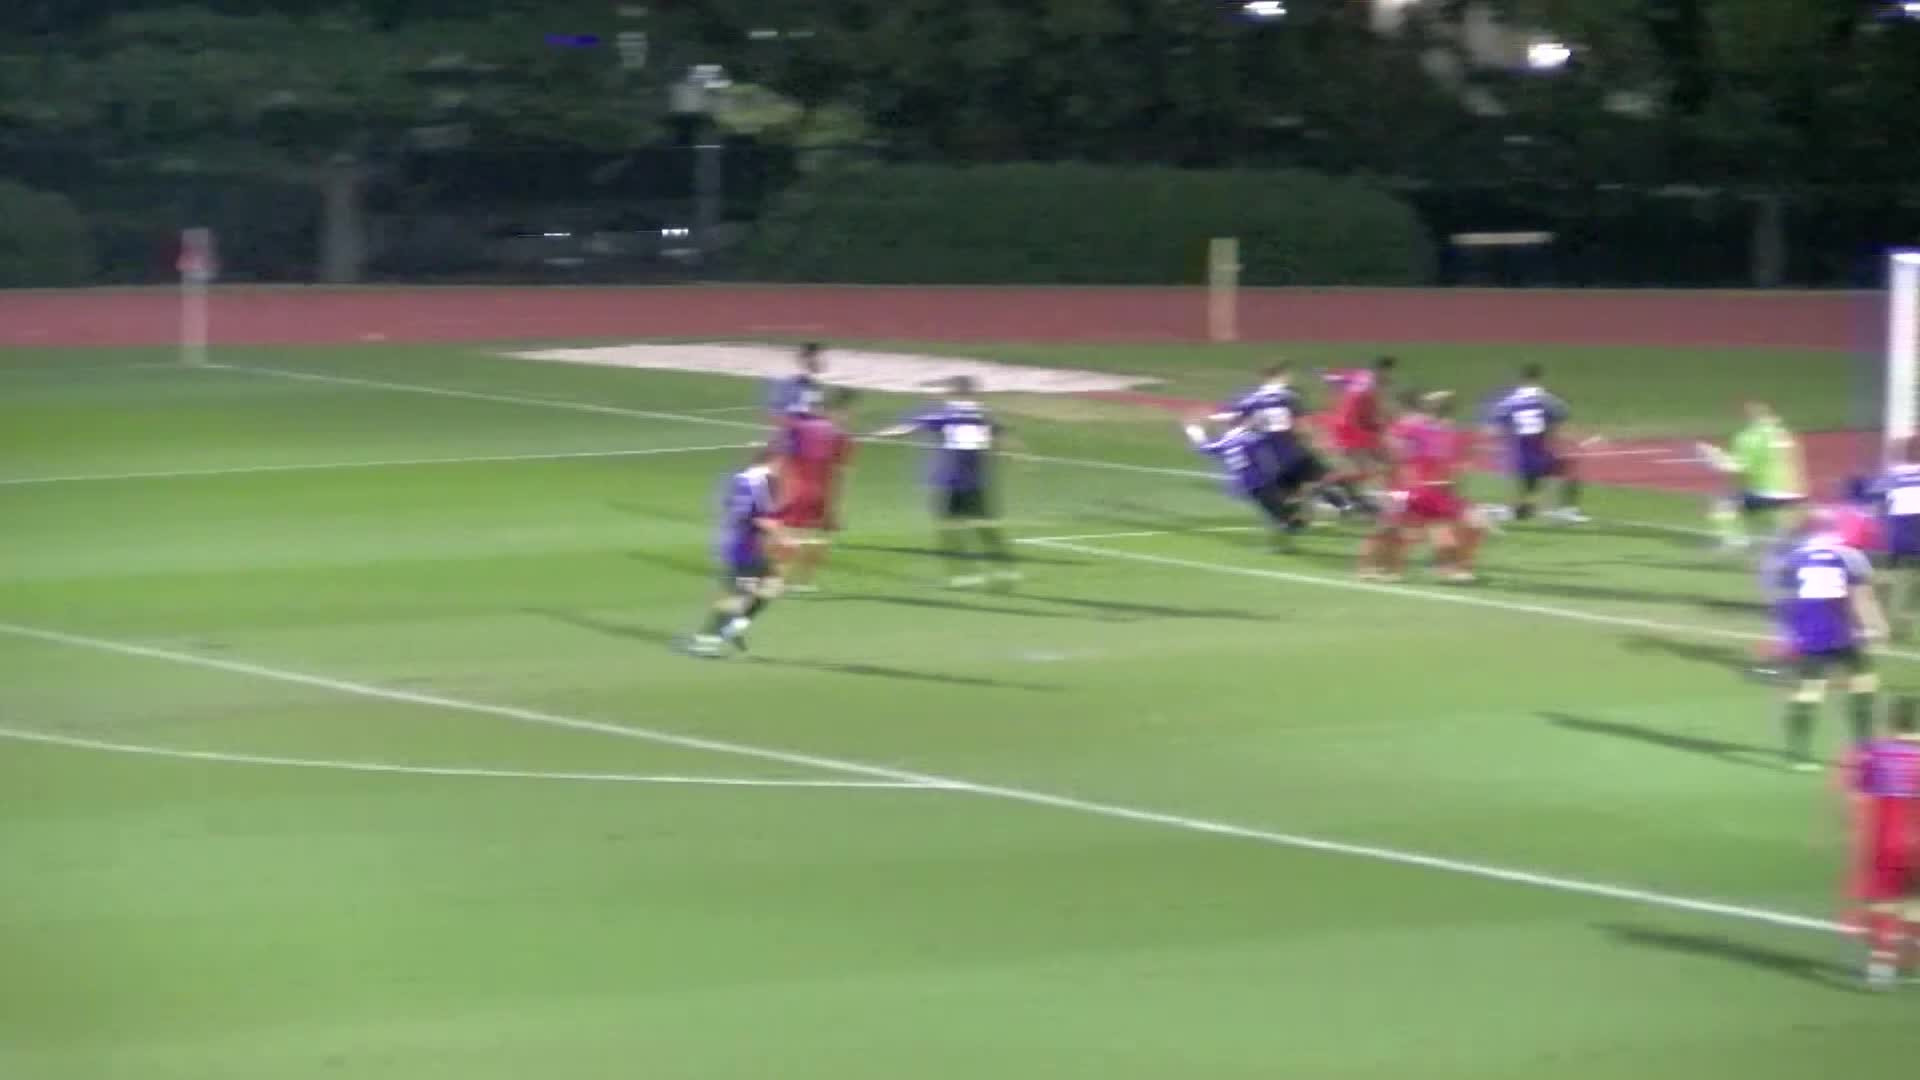 1920x1080 Boorom knocks in his second goal of the year against Central Arkansas